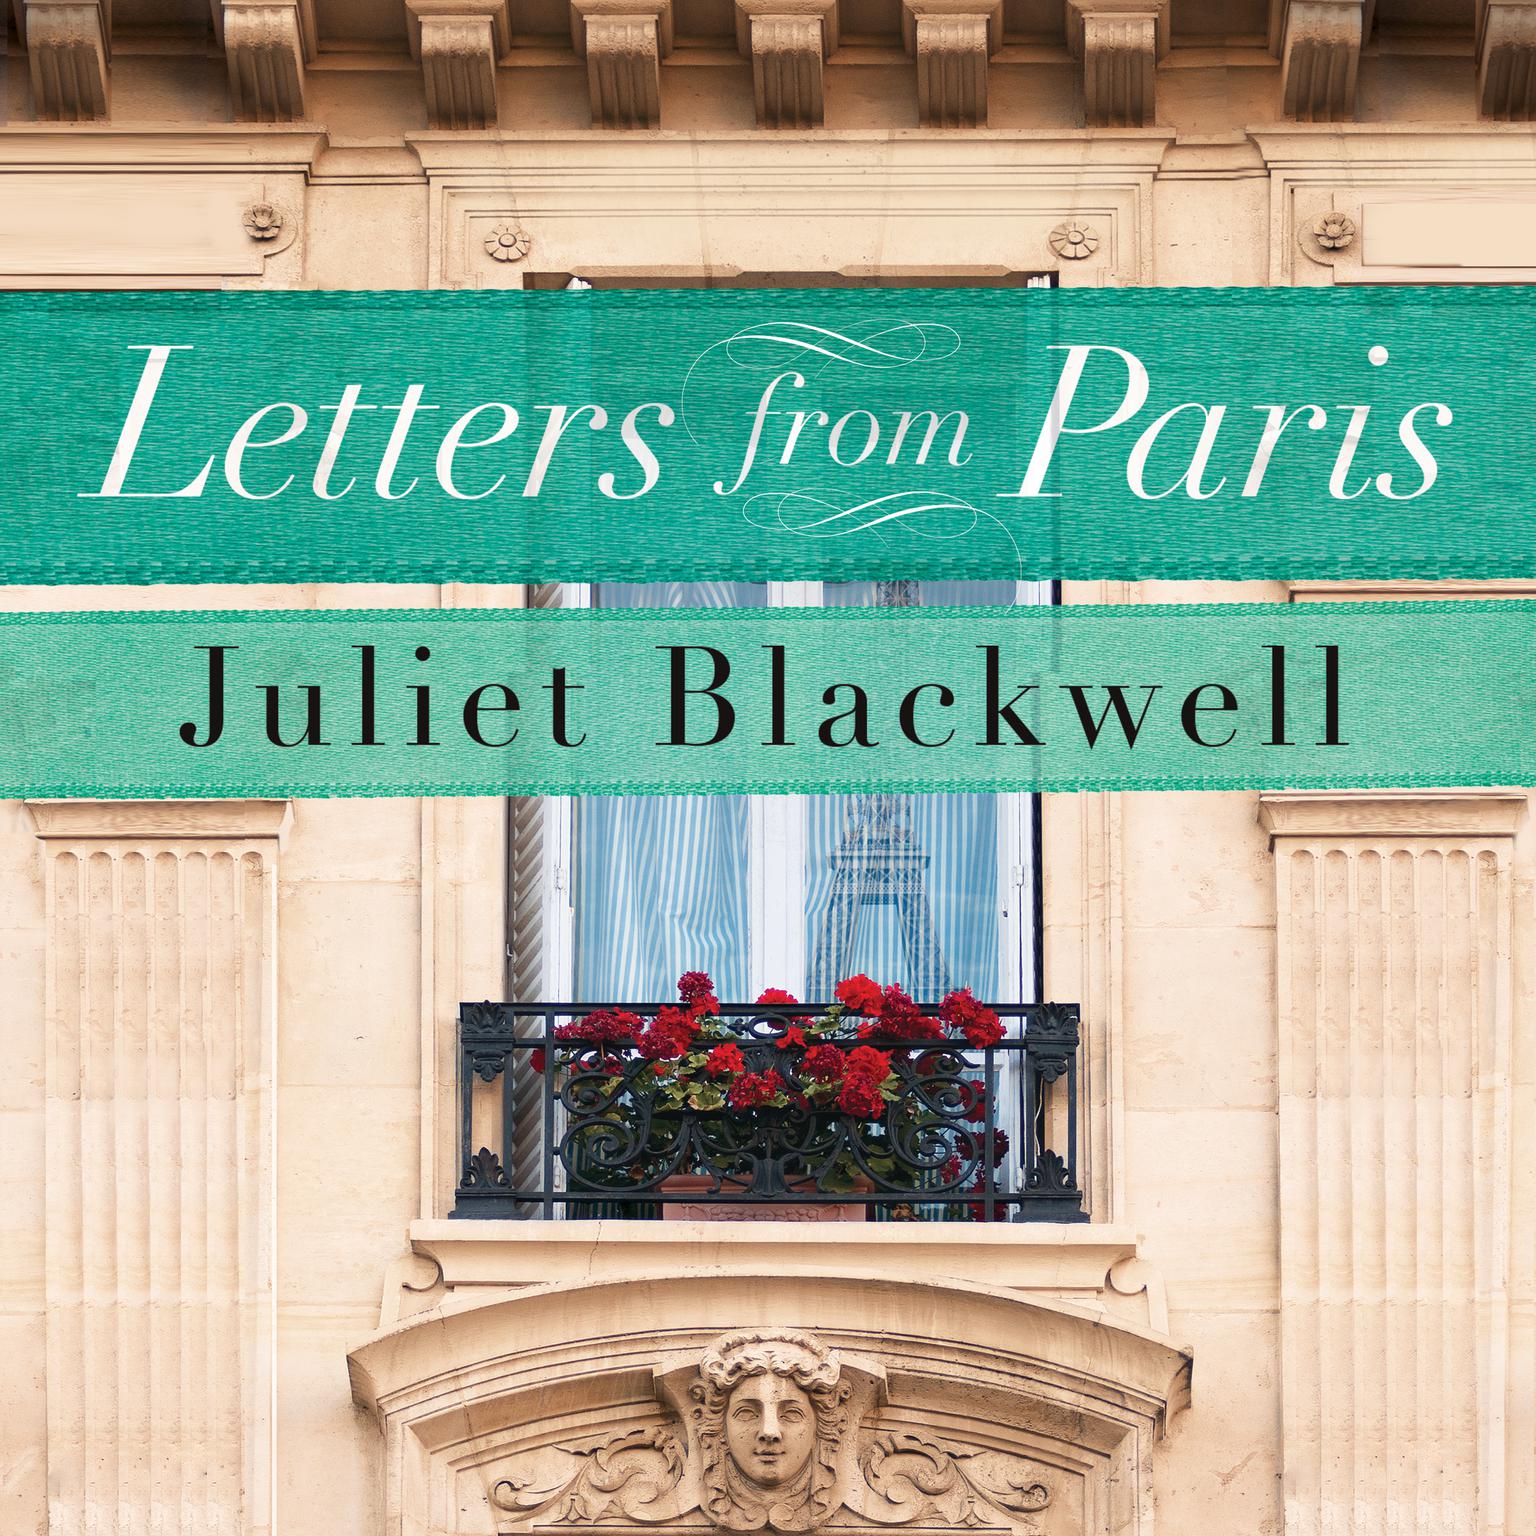 Letters From Paris Audiobook, by Juliet Blackwell